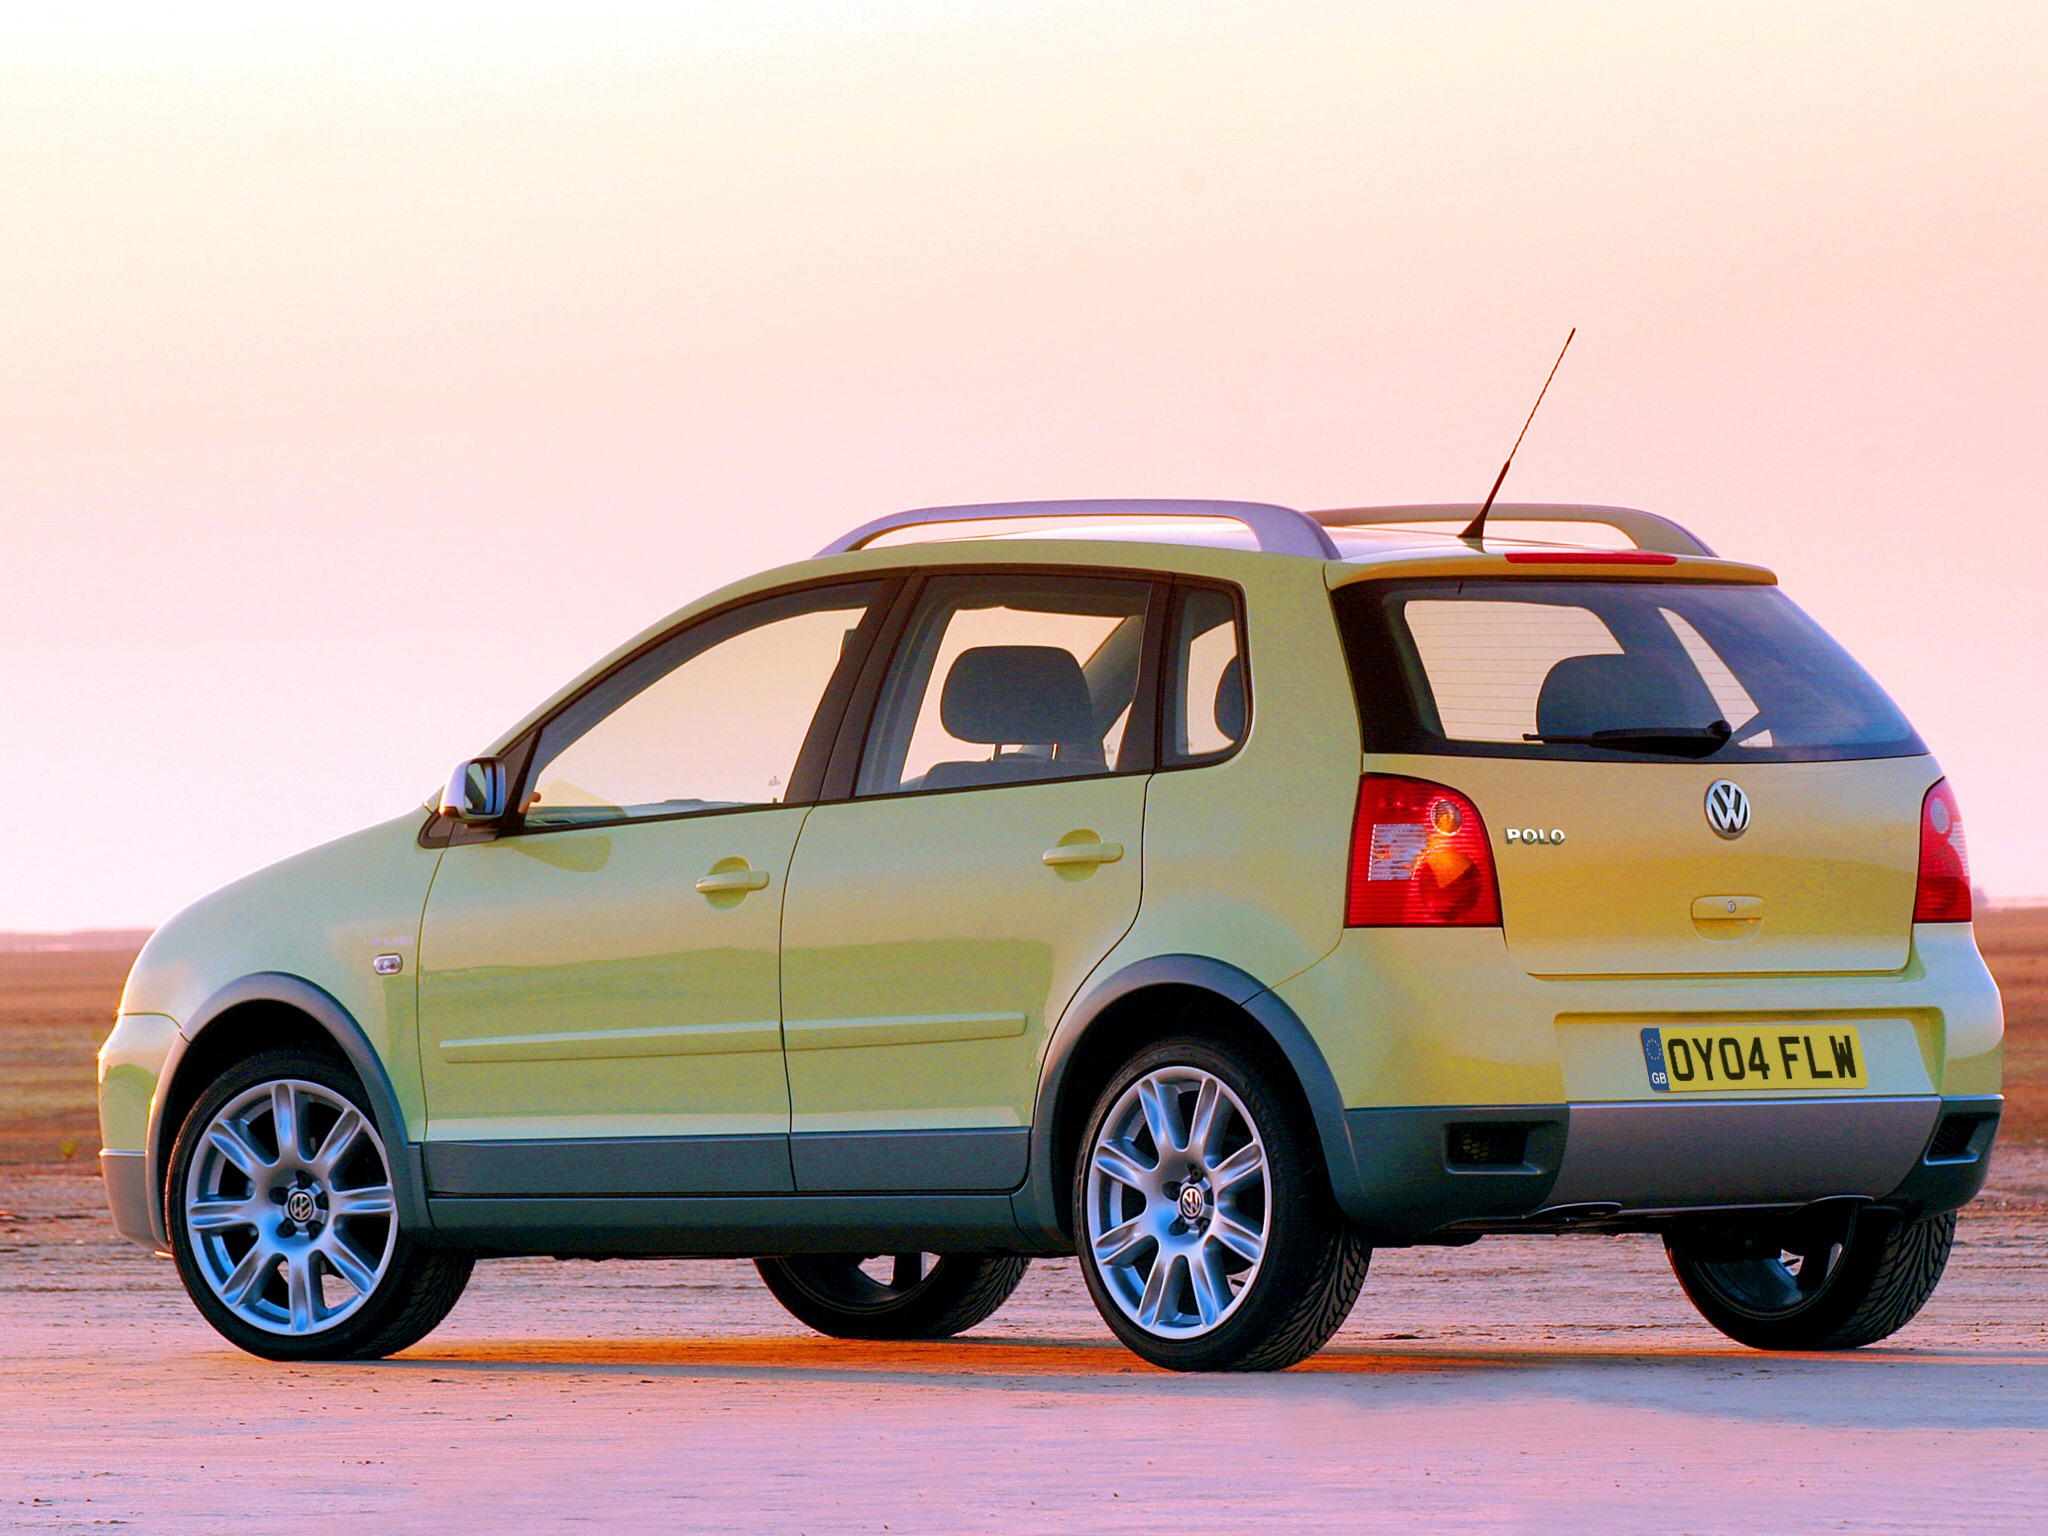 Car in pictures car photo gallery » Volkswagen Polo Fun